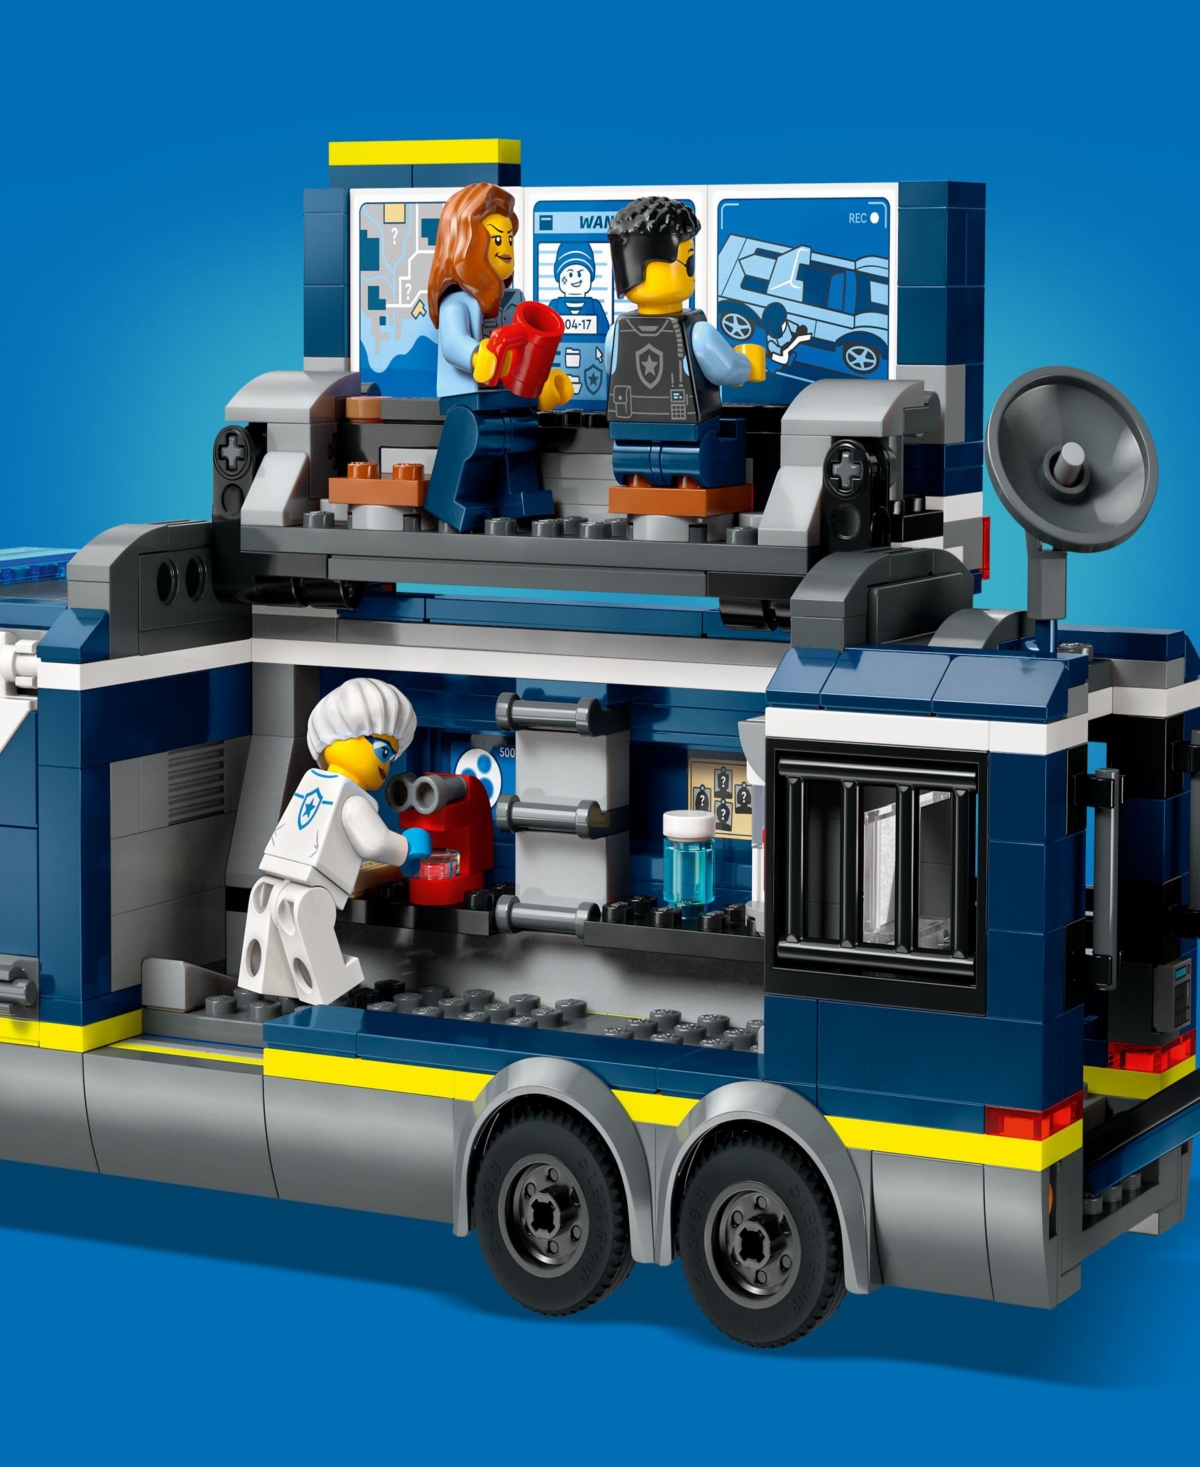 Shop Lego City Police Mobile Crime Lab Truck Toy 60418, 674 Pieces In Multicolor